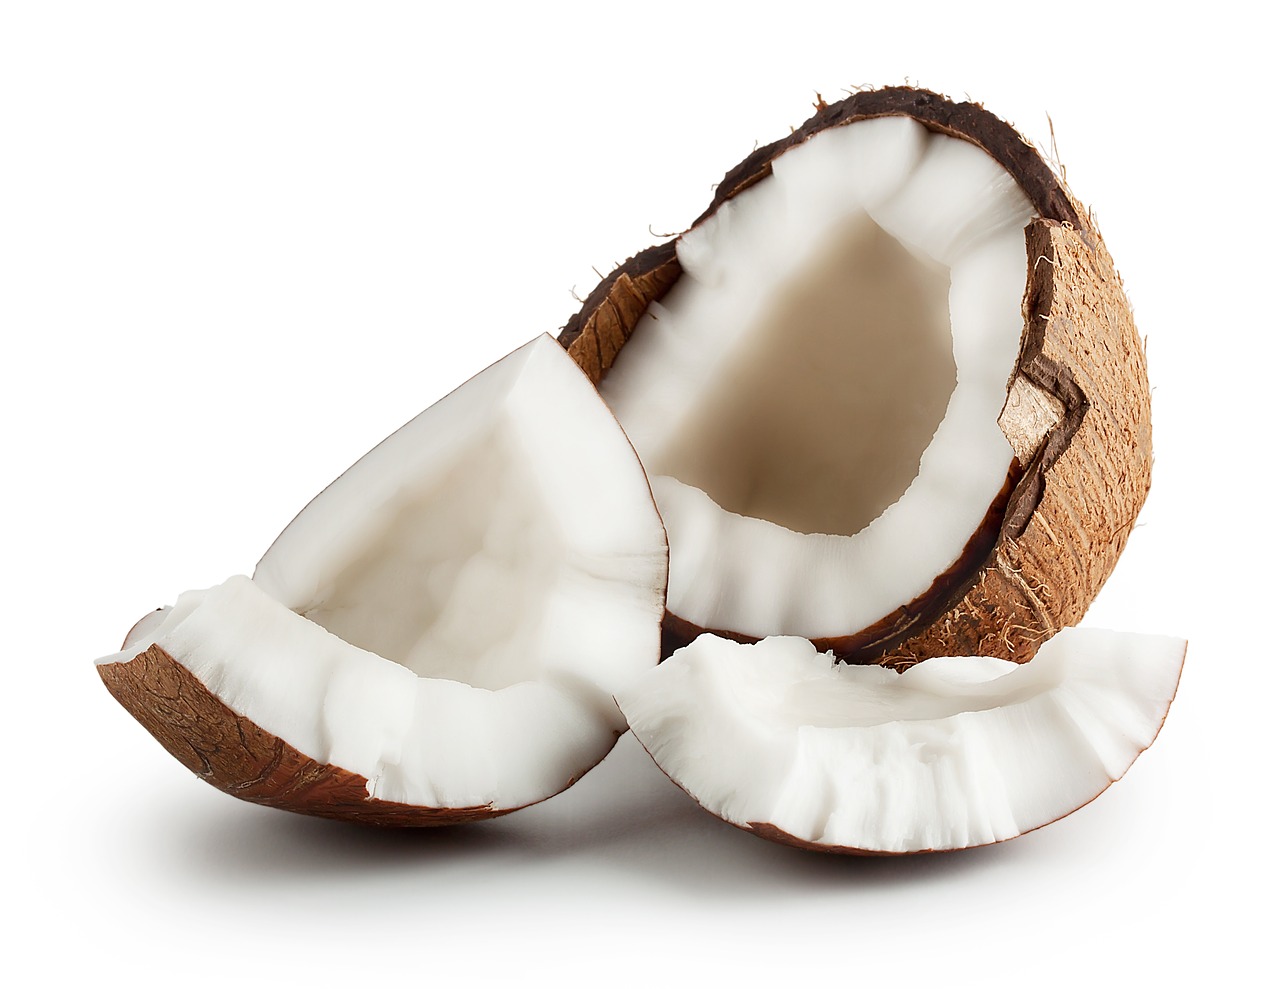 Coconut is Safe and Healthy For Your Dog